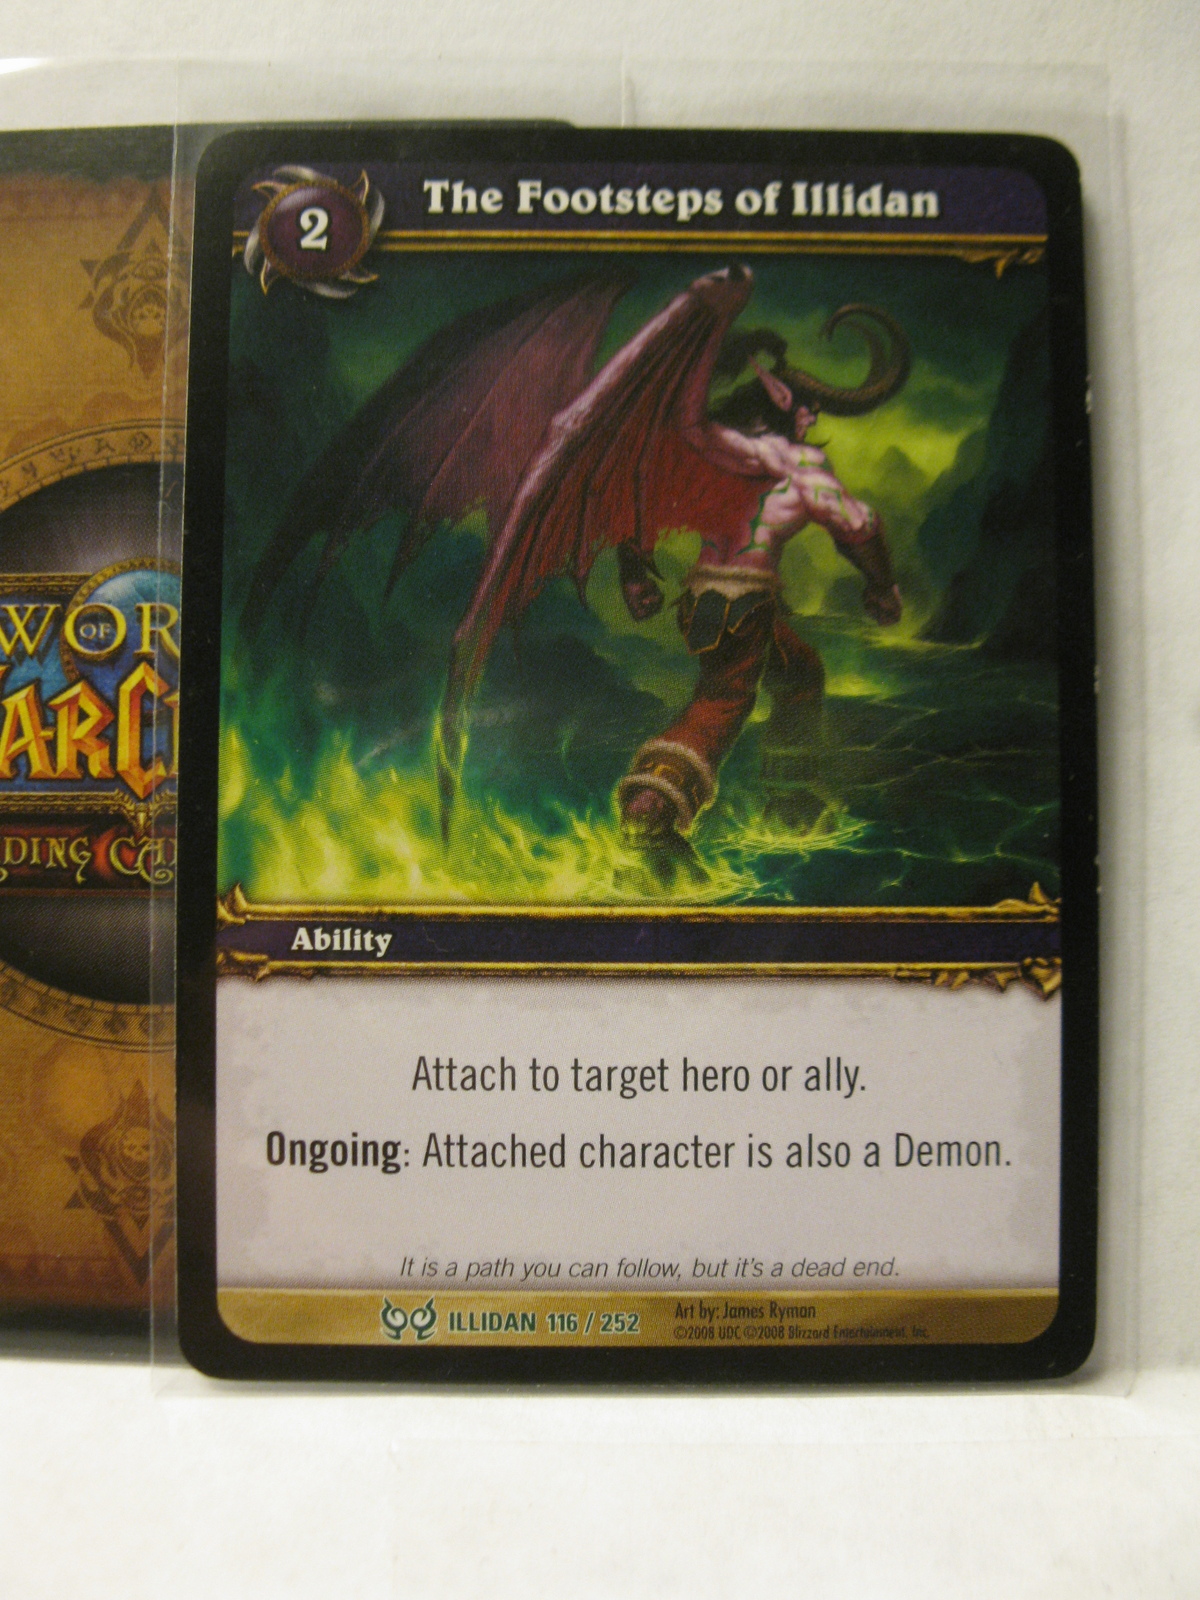 Primary image for (TC-1575) 2008 World of Warcraft Trading Card #116/252: Footsteps of ILLIDAN